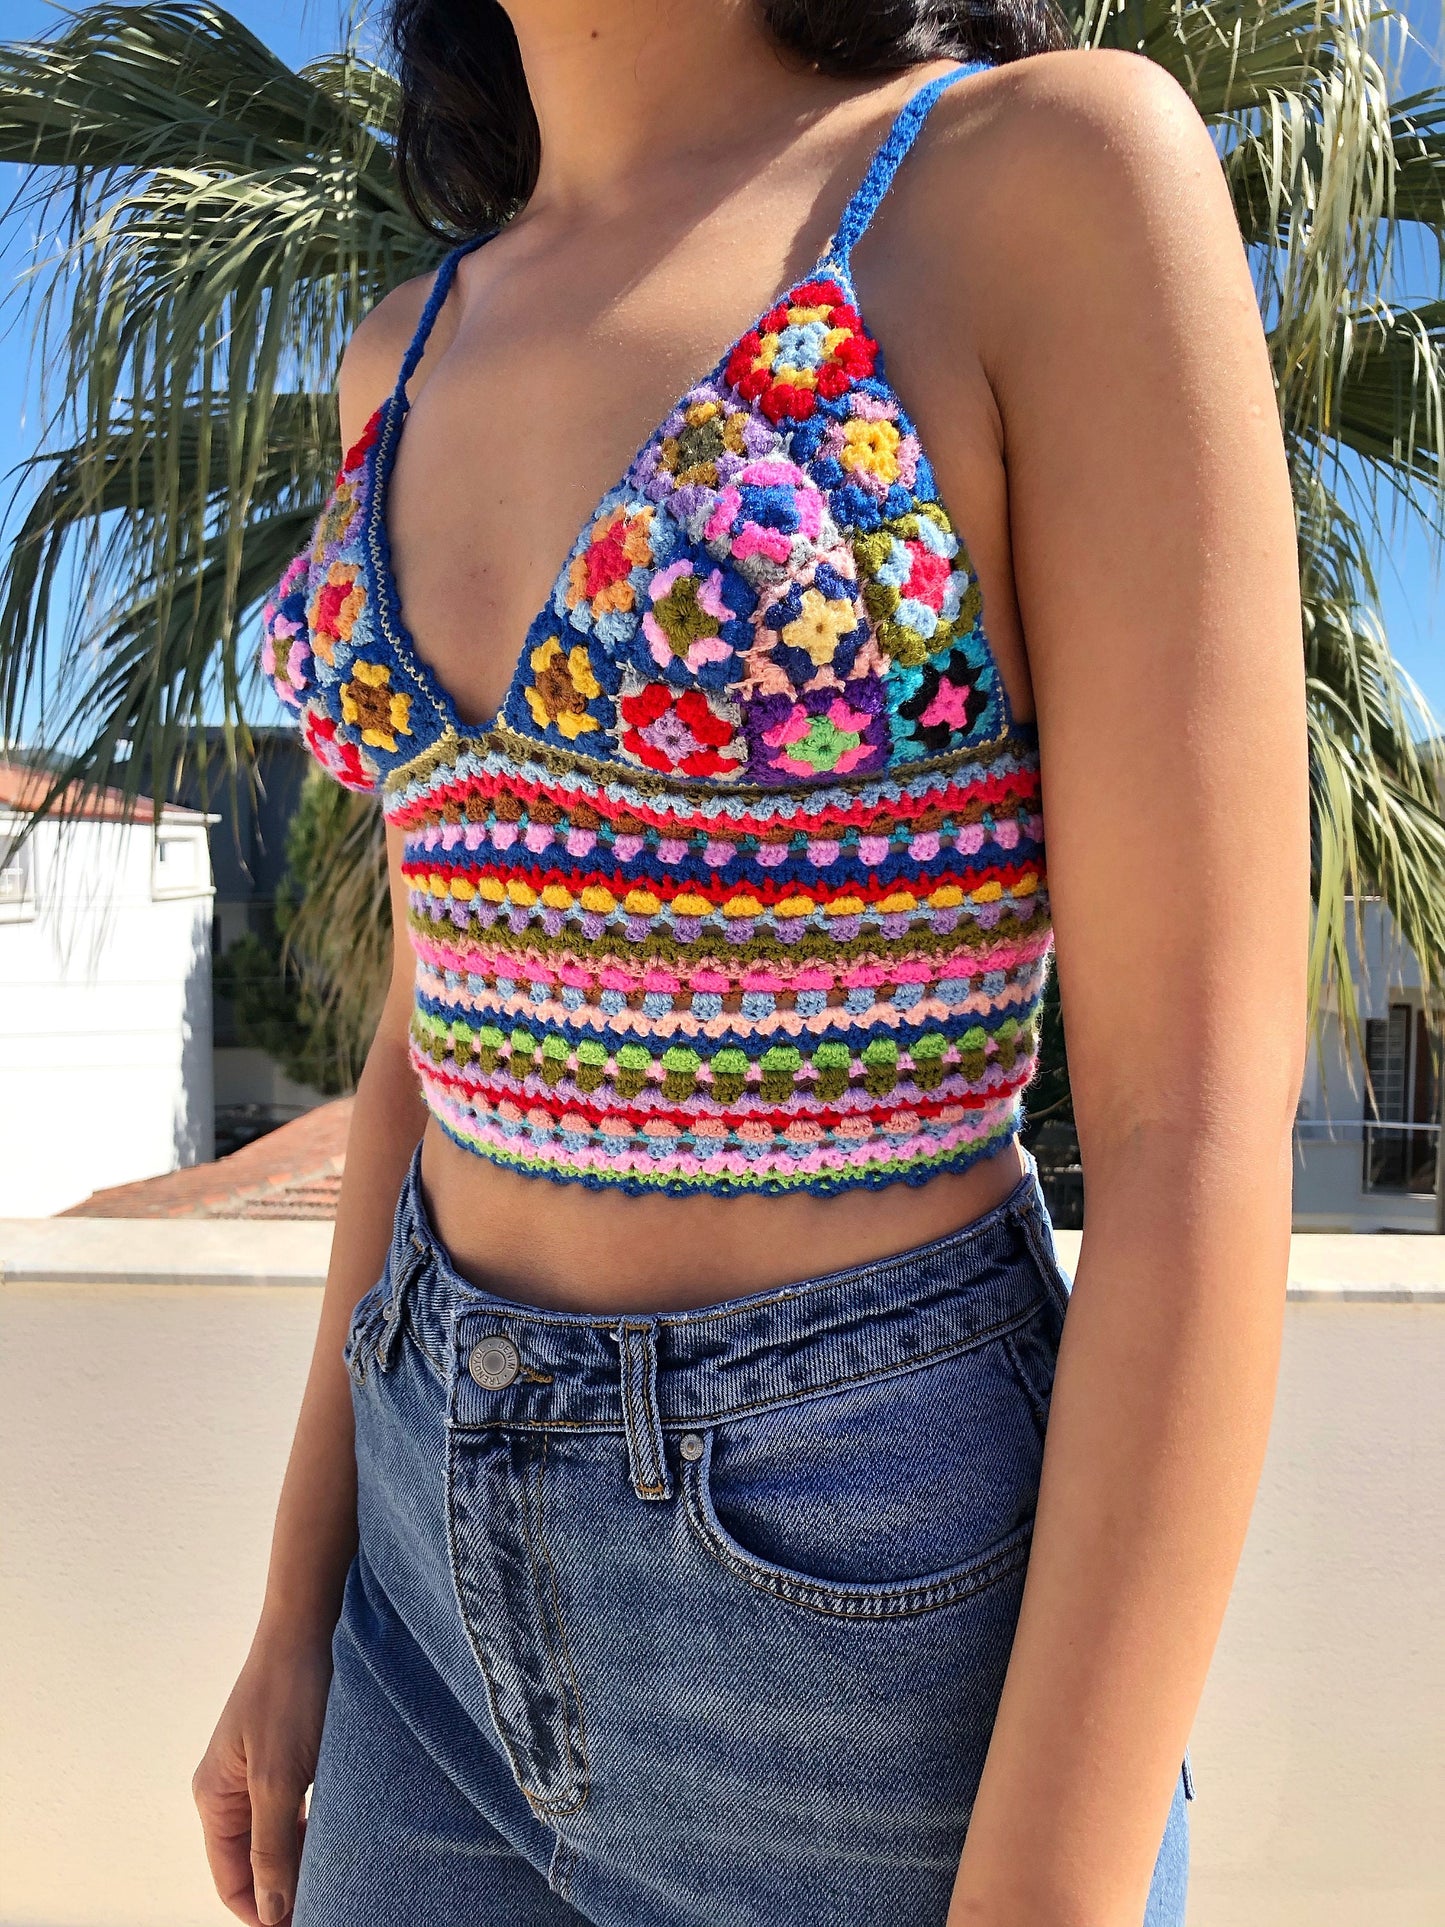 Handknitted Crochet Top with Retro Granny Squares